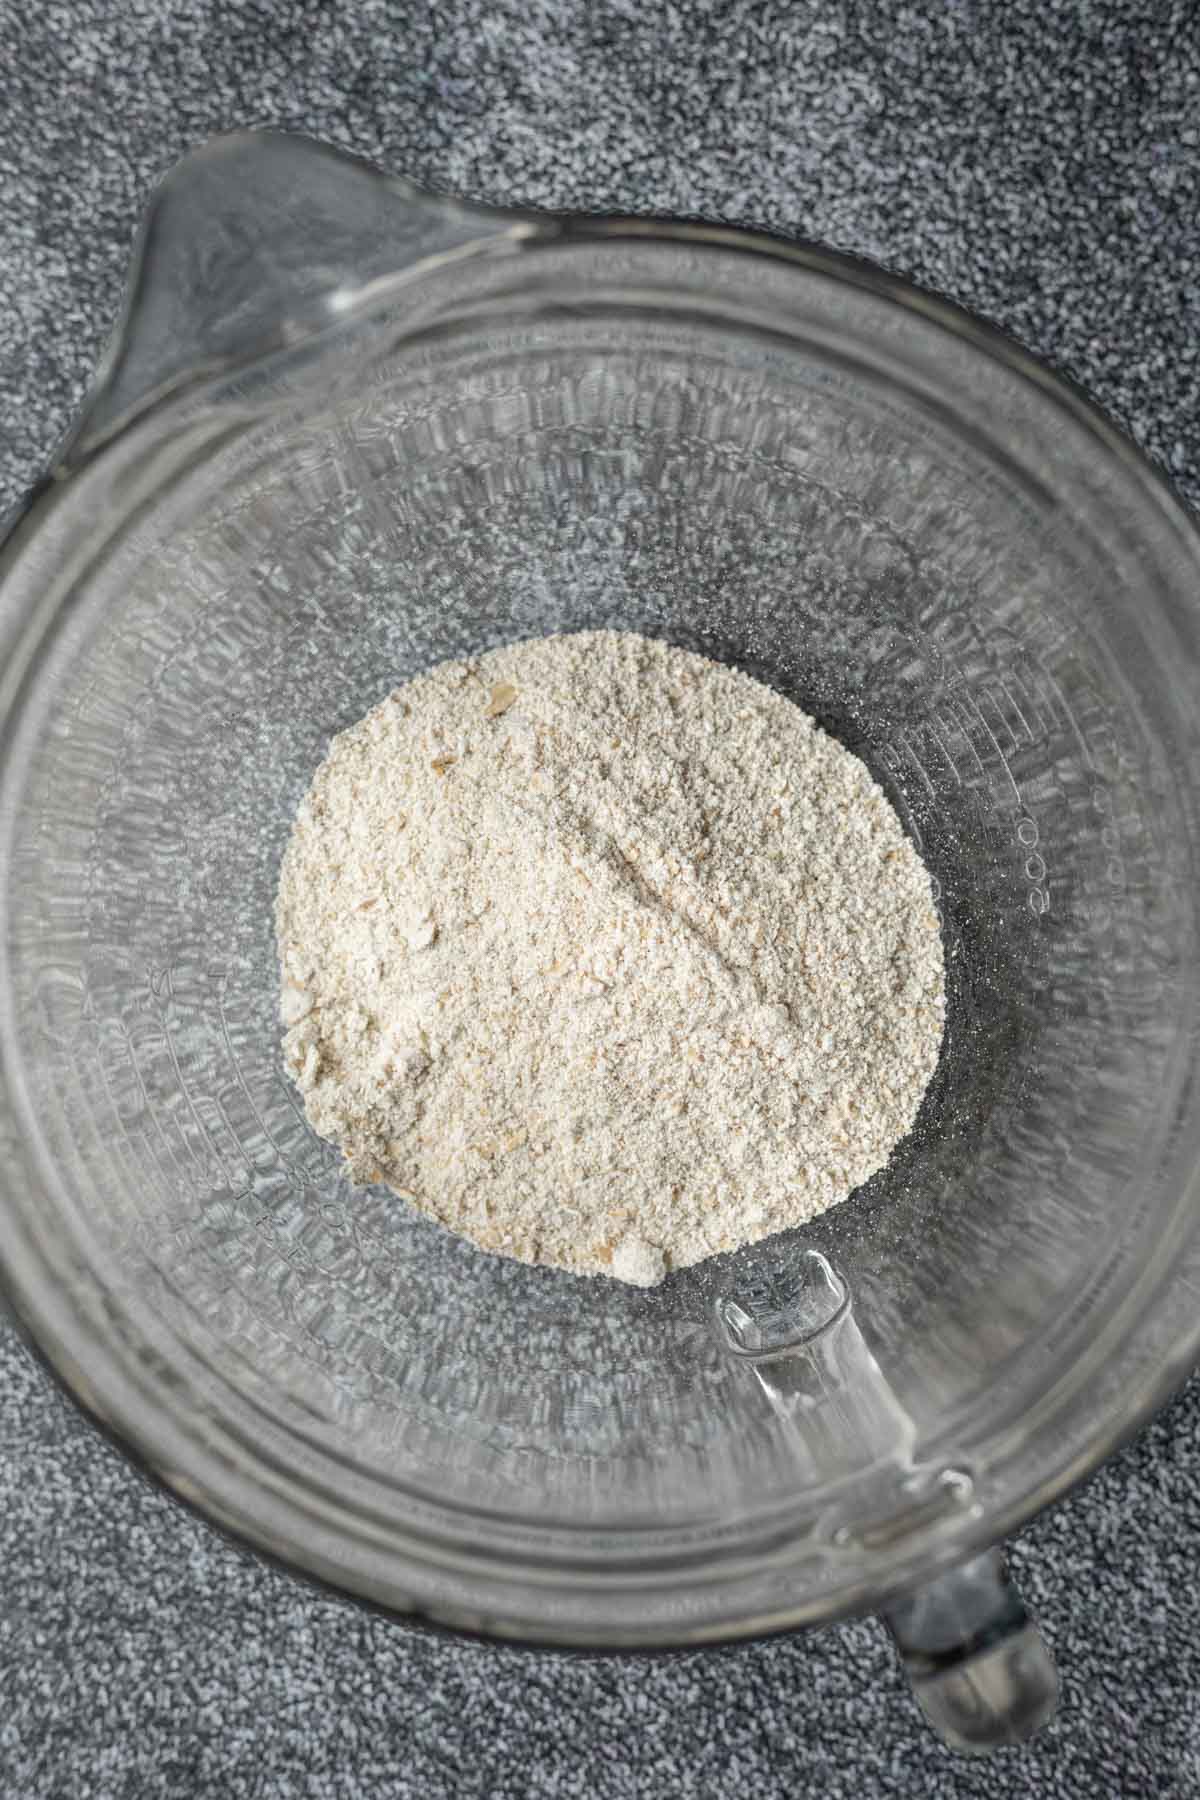 Rolled oats blended into flour and put in large bowl.